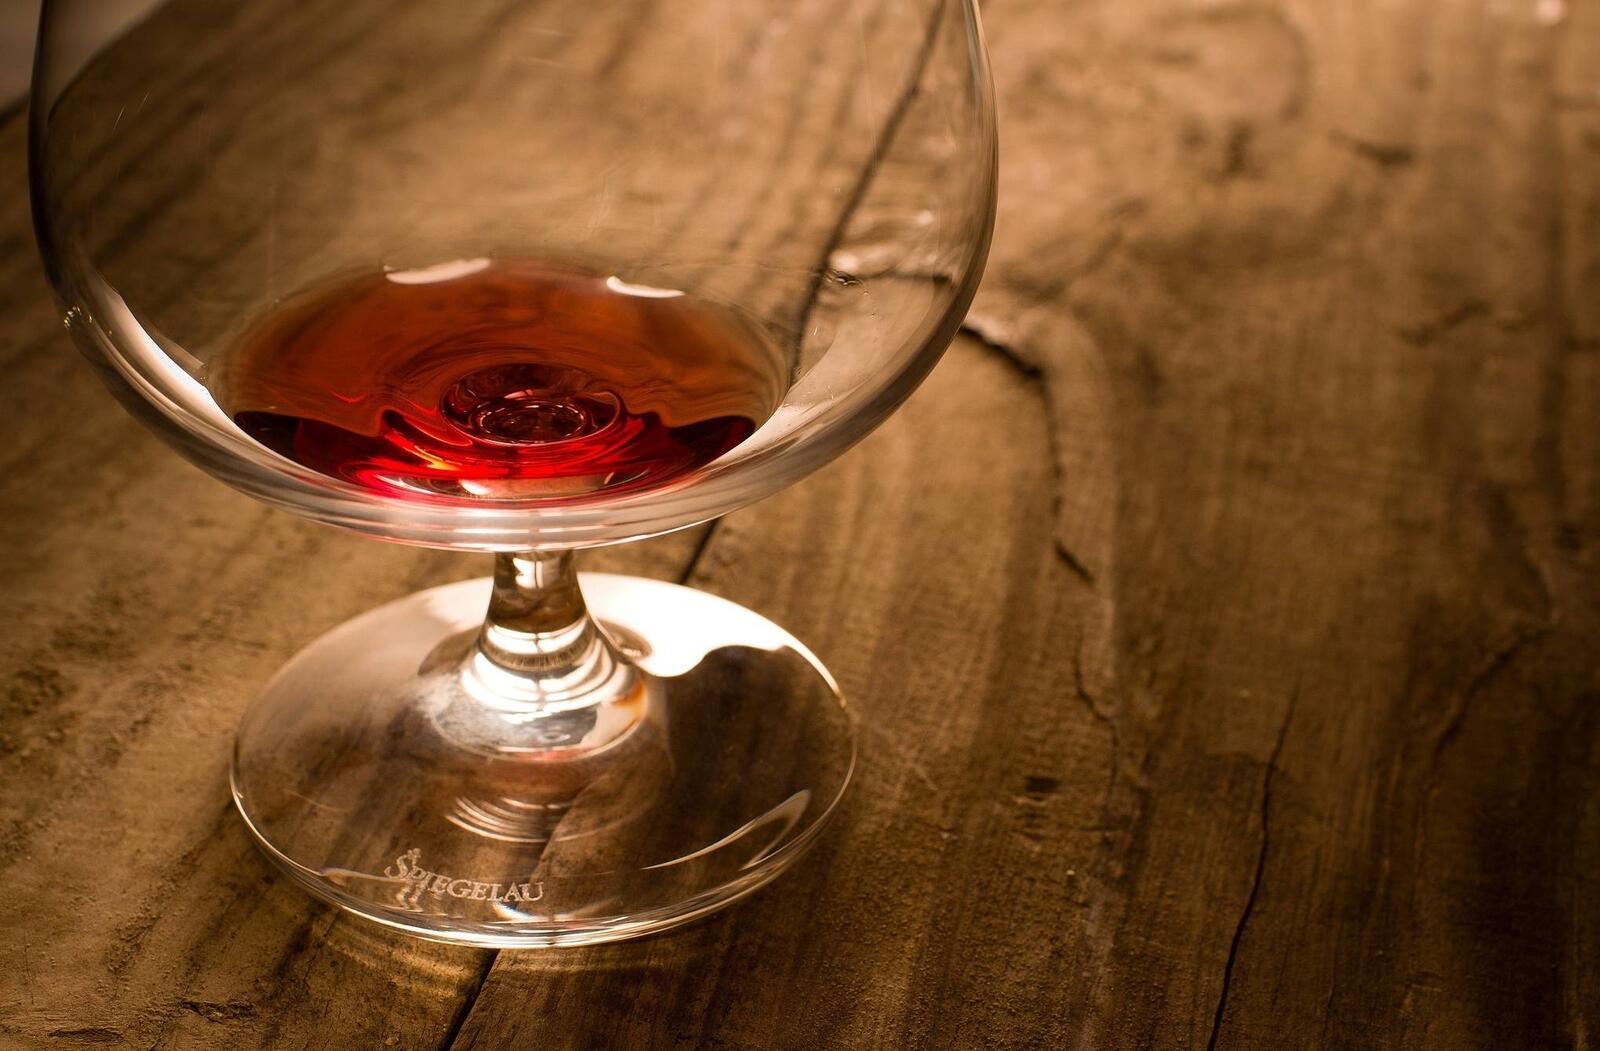 Free photo Gallery photo of a glass of wine